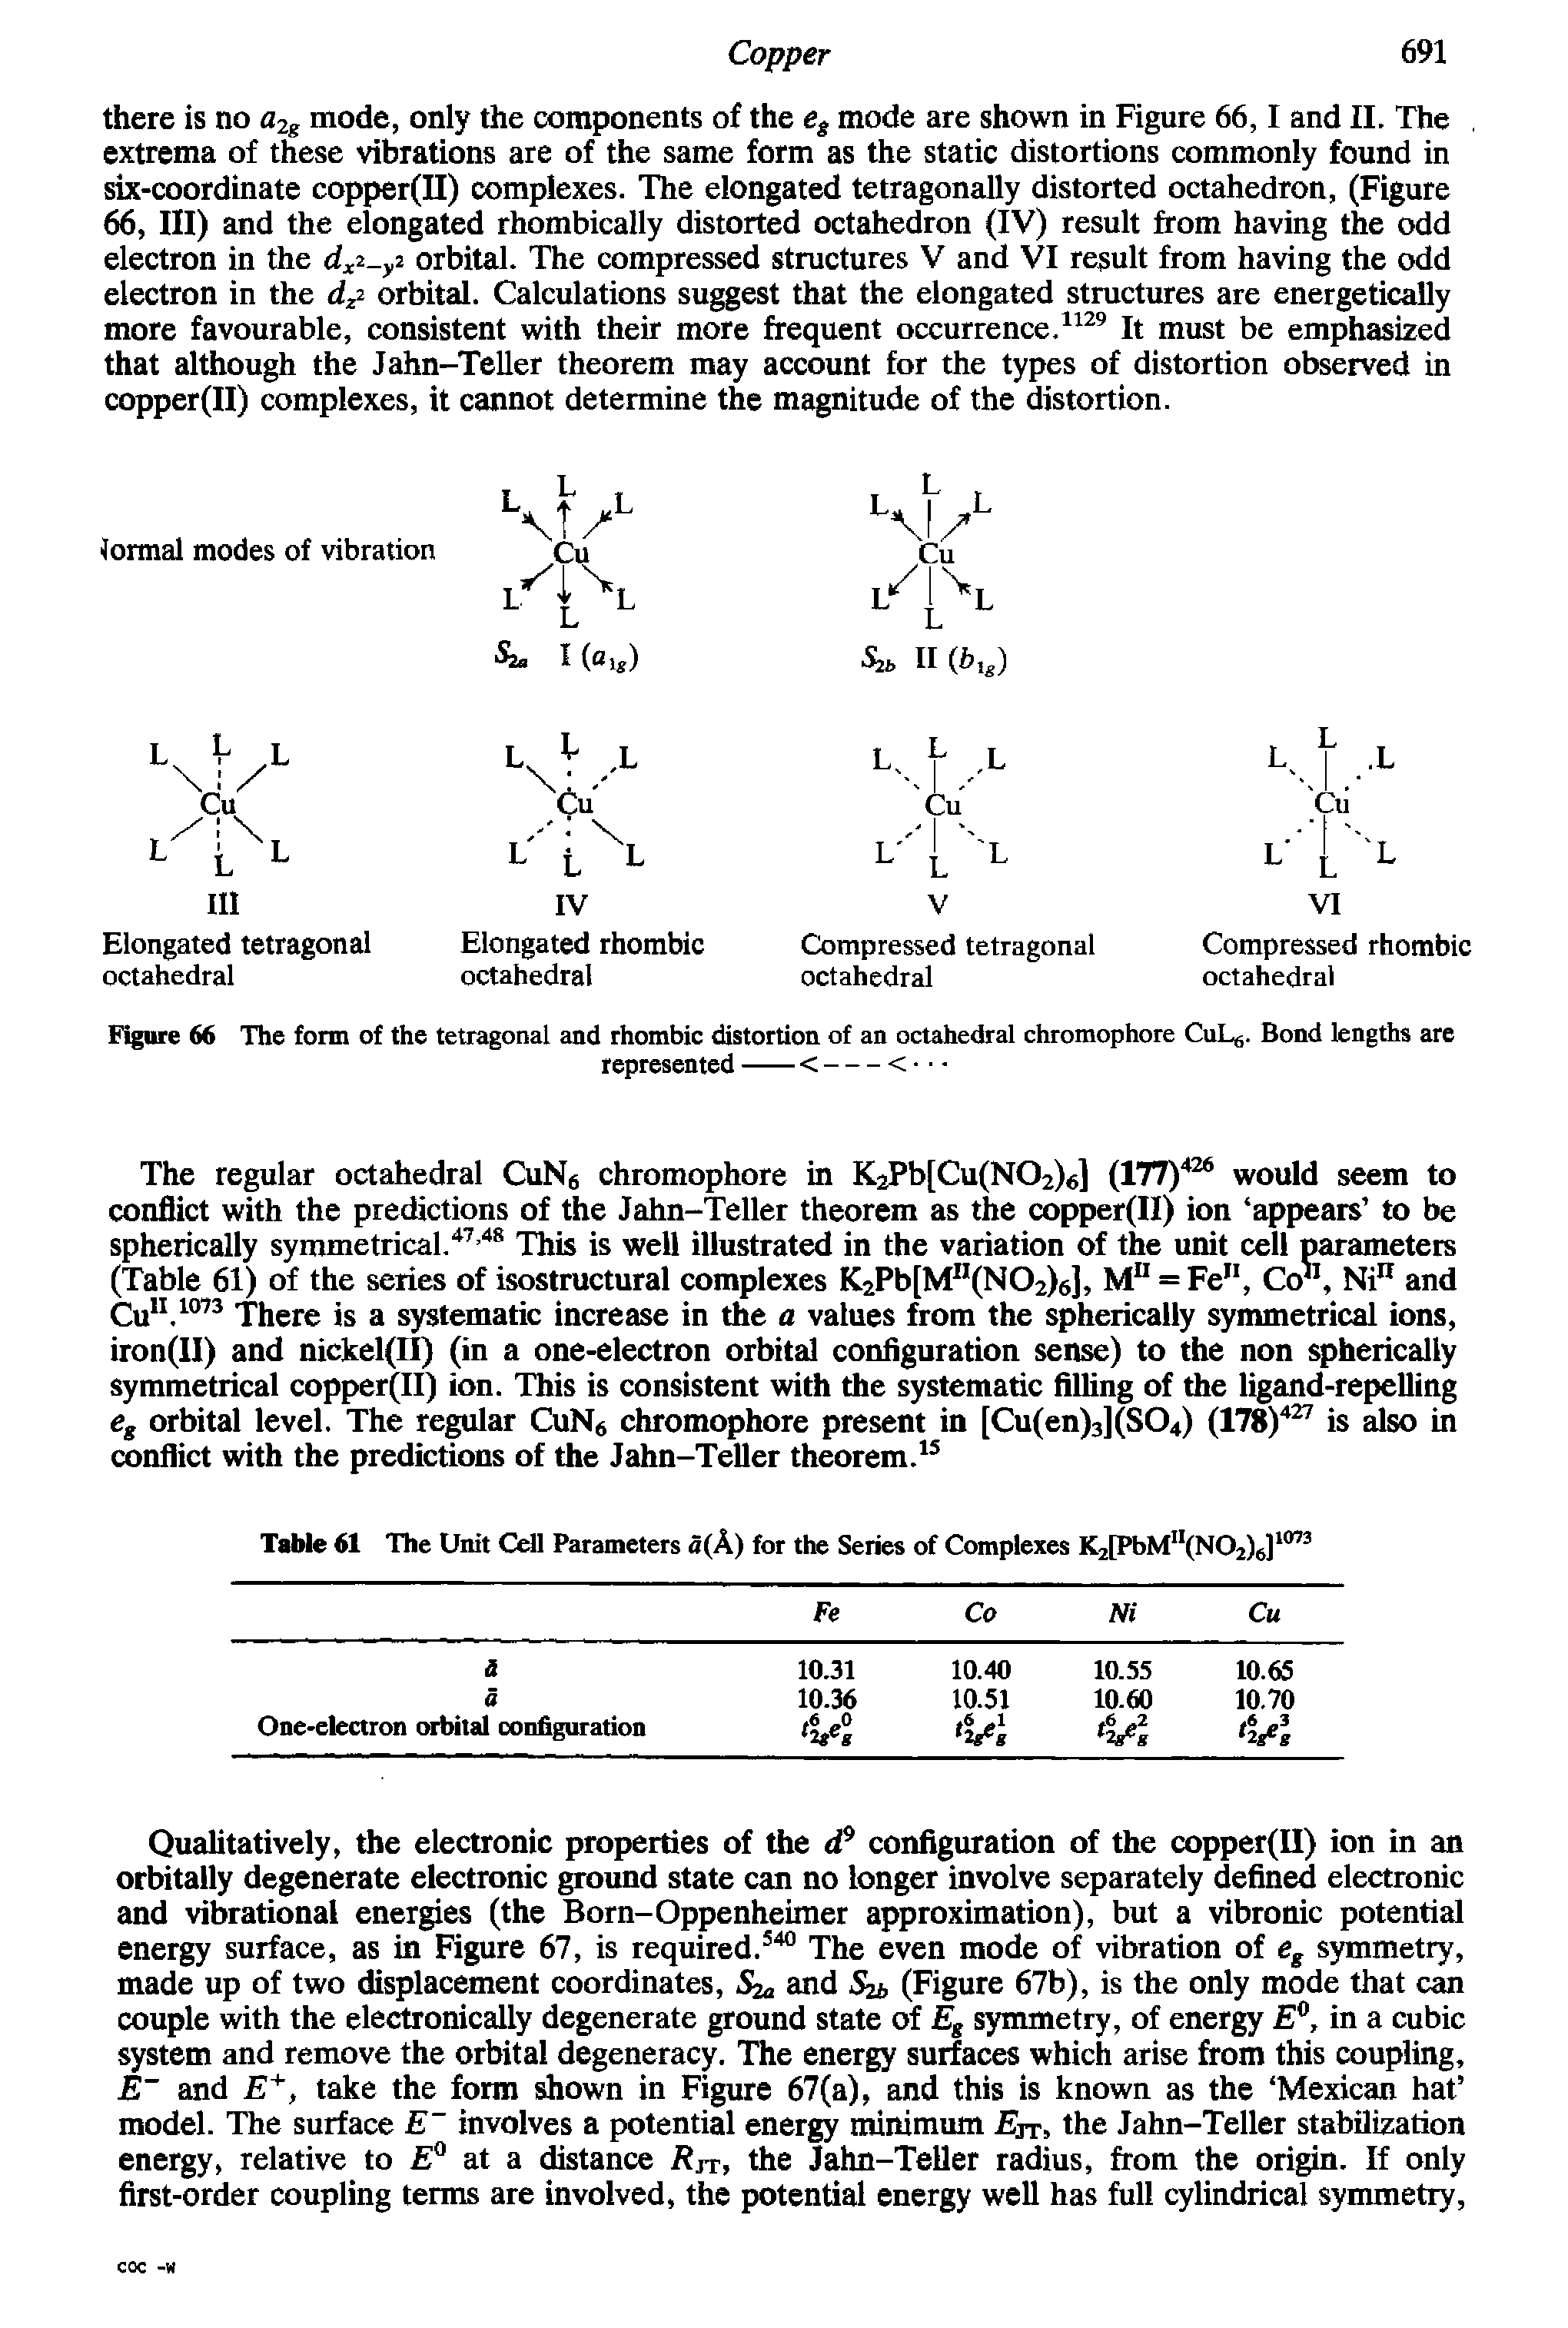 Figure 66 The form of the tetragonal and rhombic distortion of an octahedral chromophore CuL6. Bond lengths are...